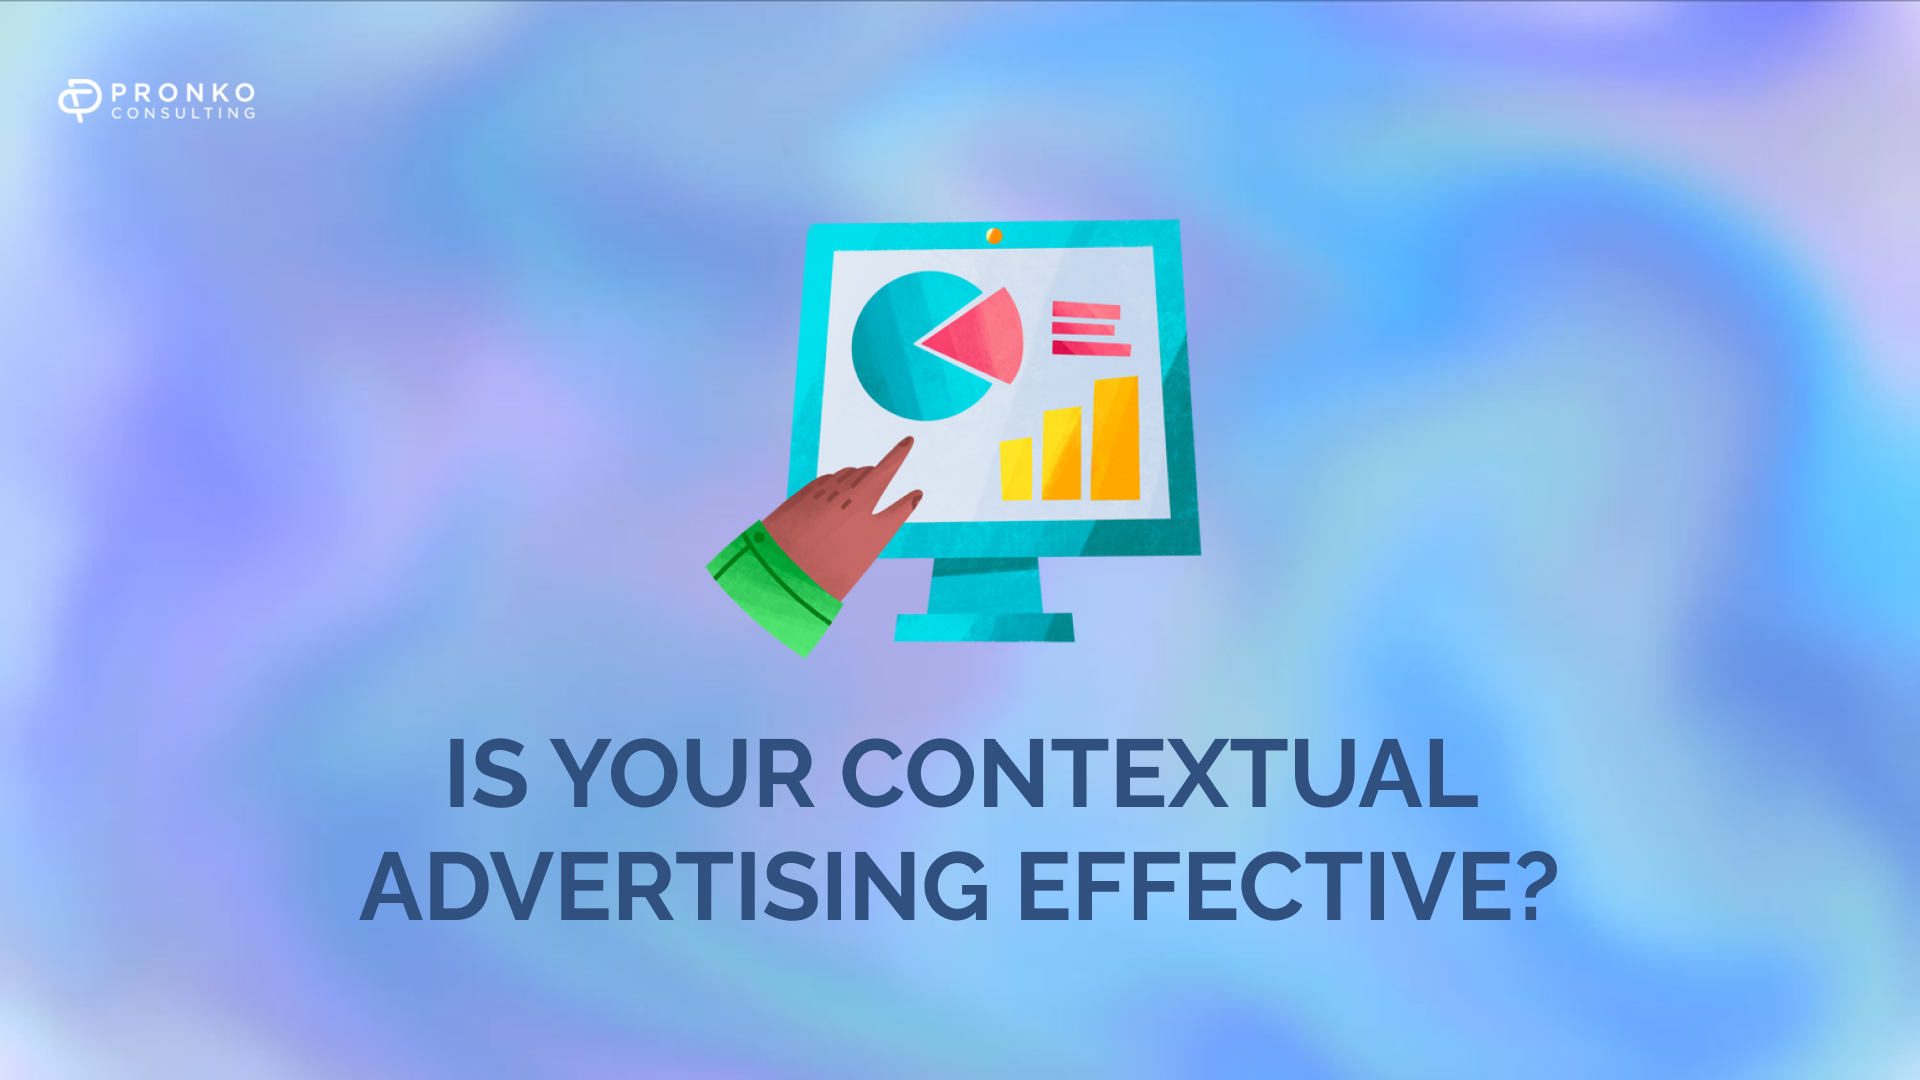 How to evaluate the effectiveness of contextual advertising?